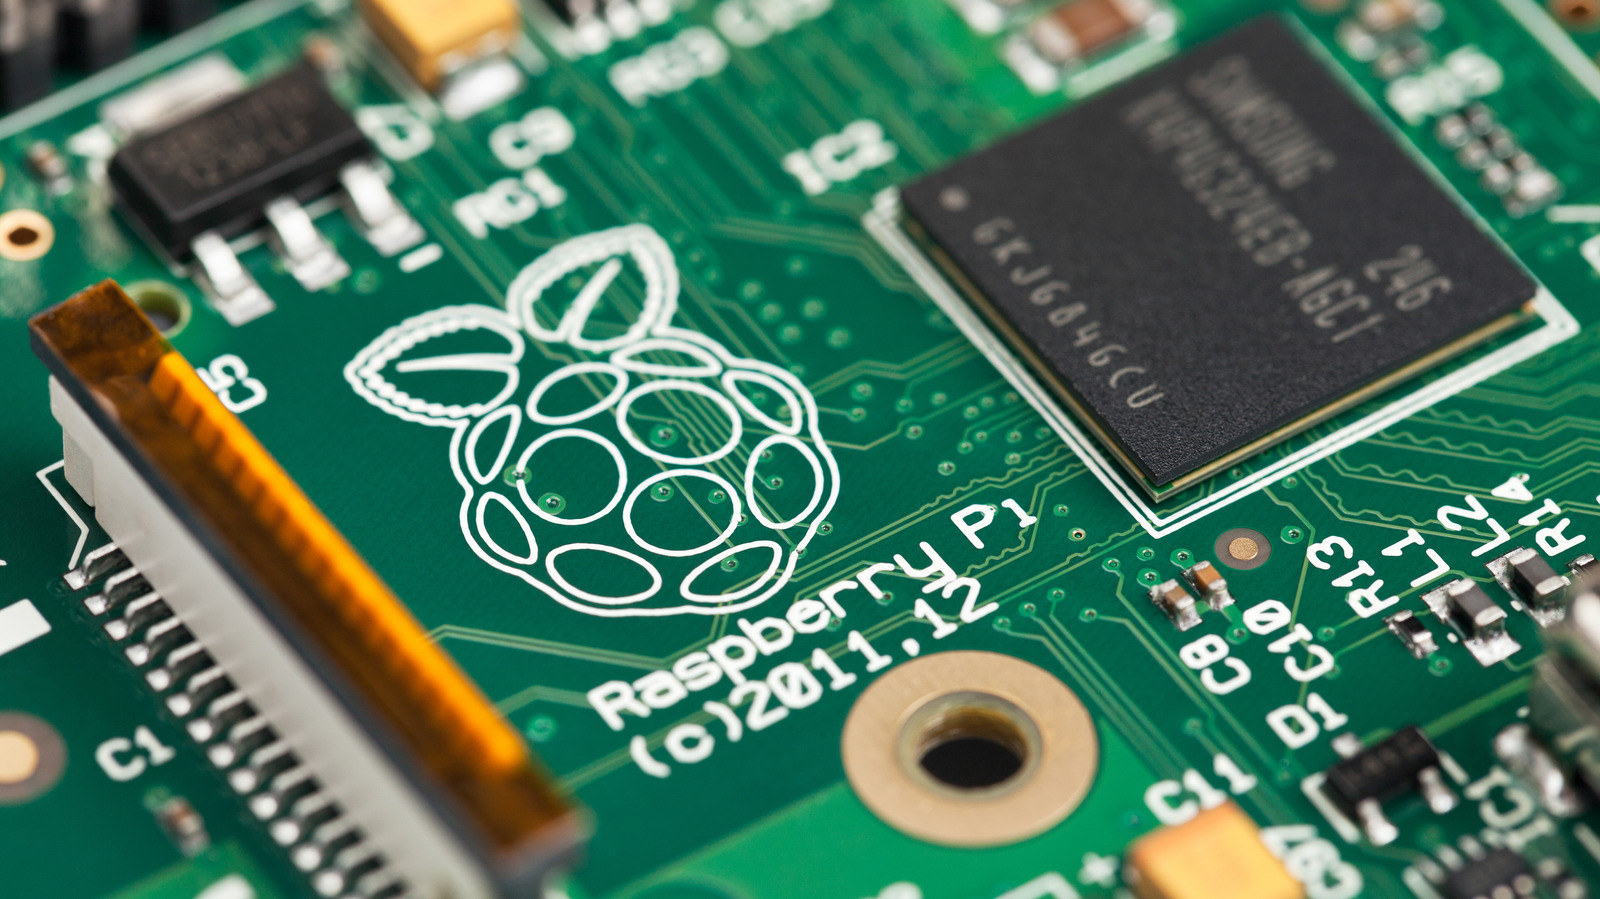 The Evolution Of Raspberry Pi: From Prototype To Single-Board Computing Workhorse